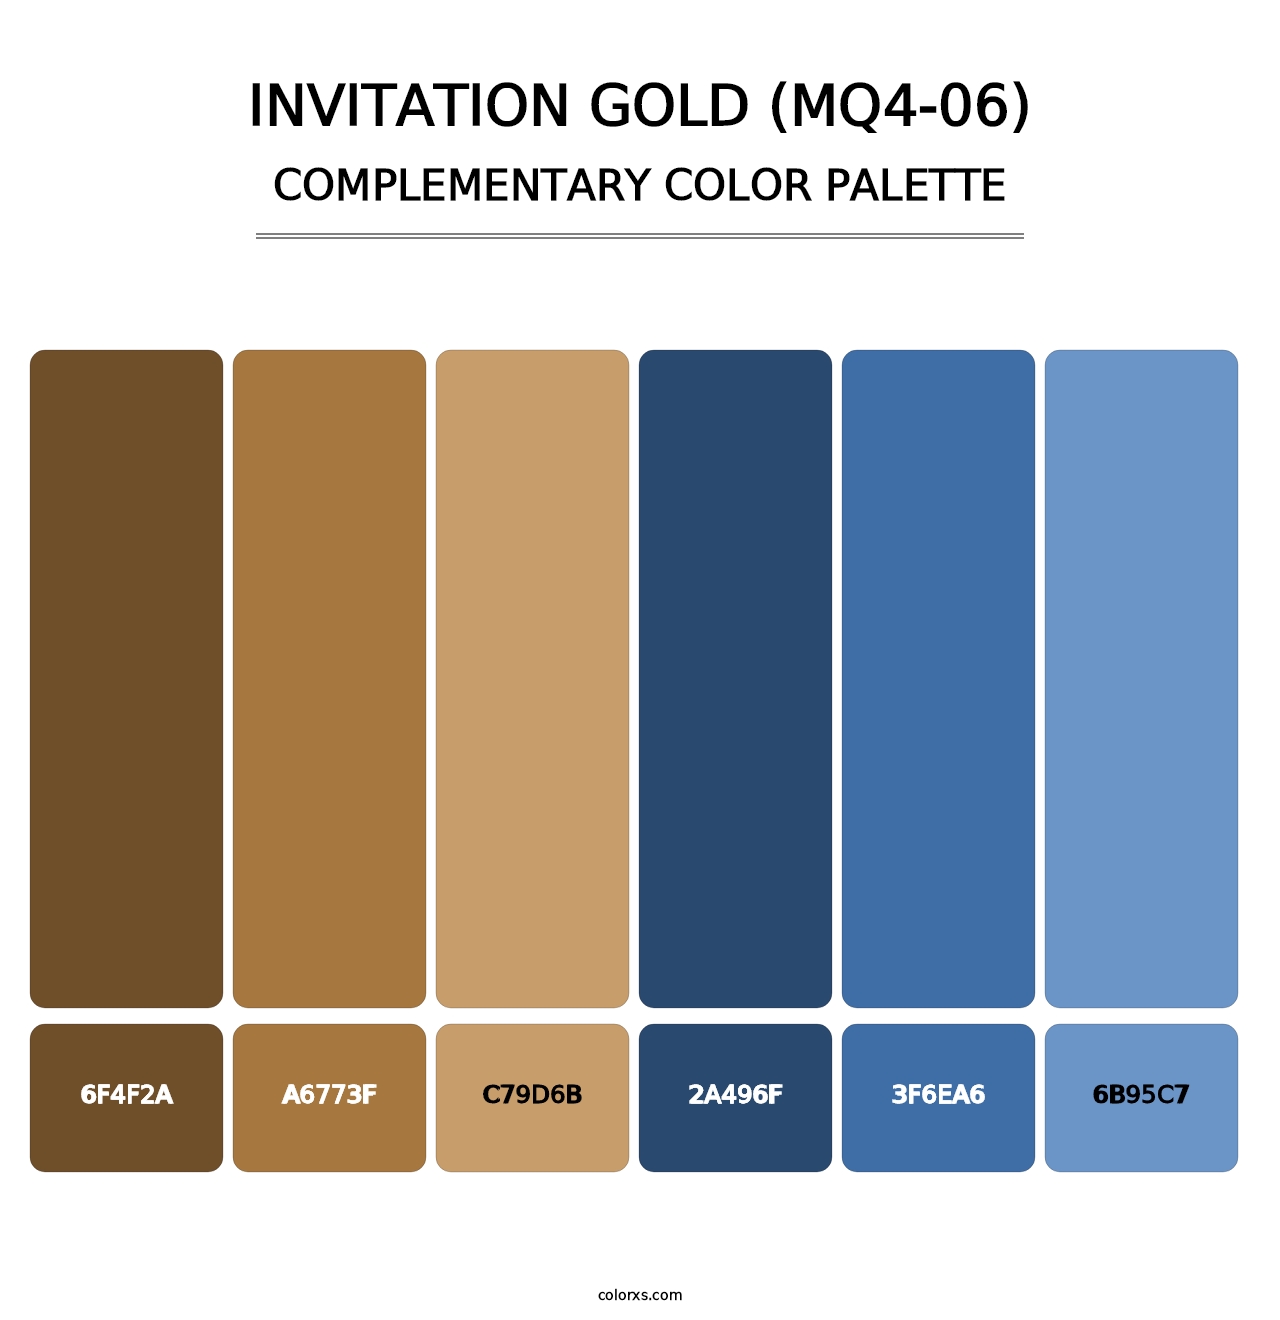 Invitation Gold (MQ4-06) - Complementary Color Palette